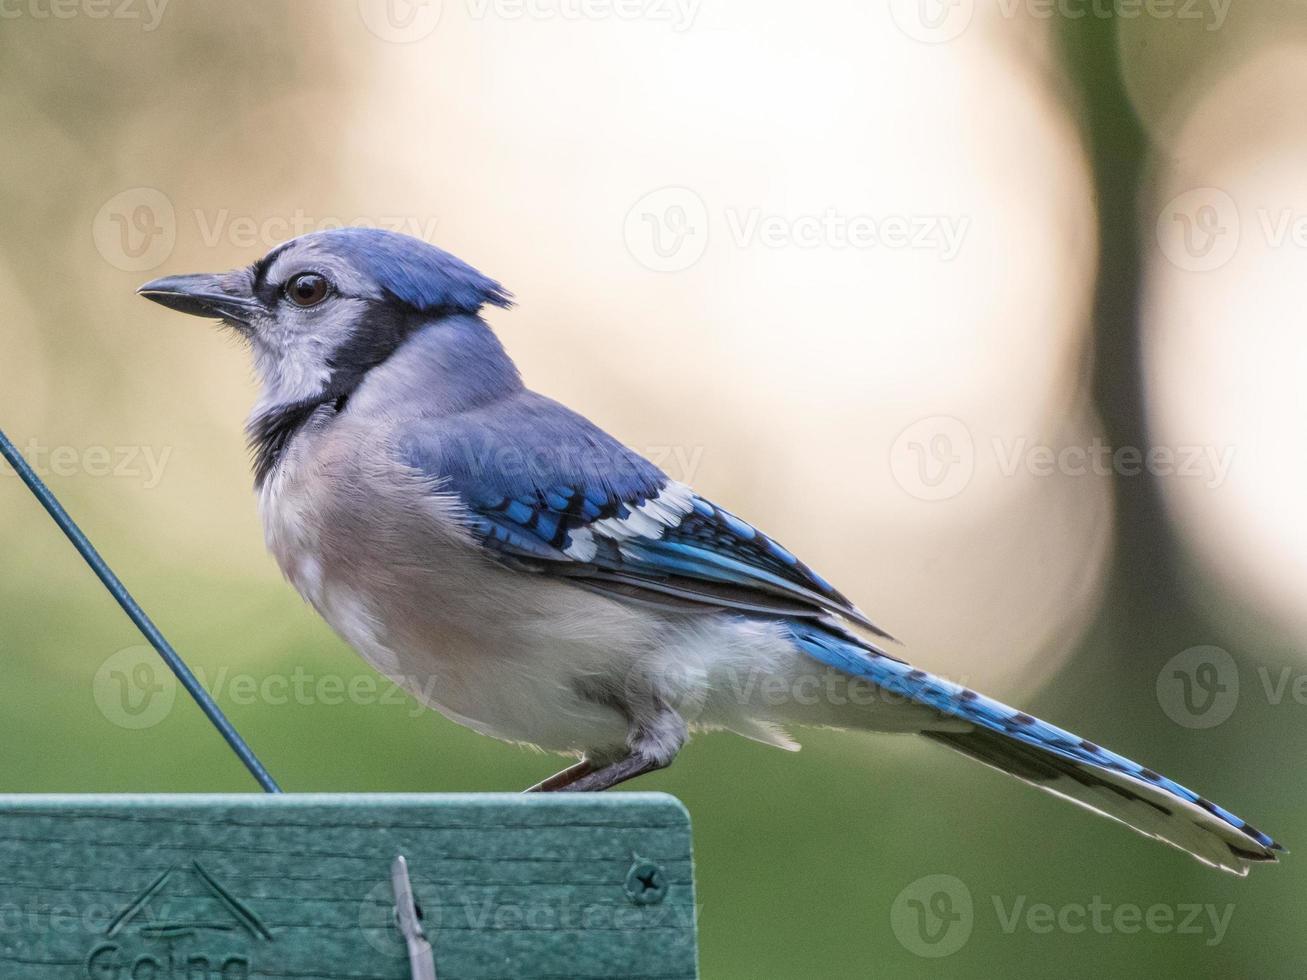 A bluejay visits a platform feeder in Texas. photo